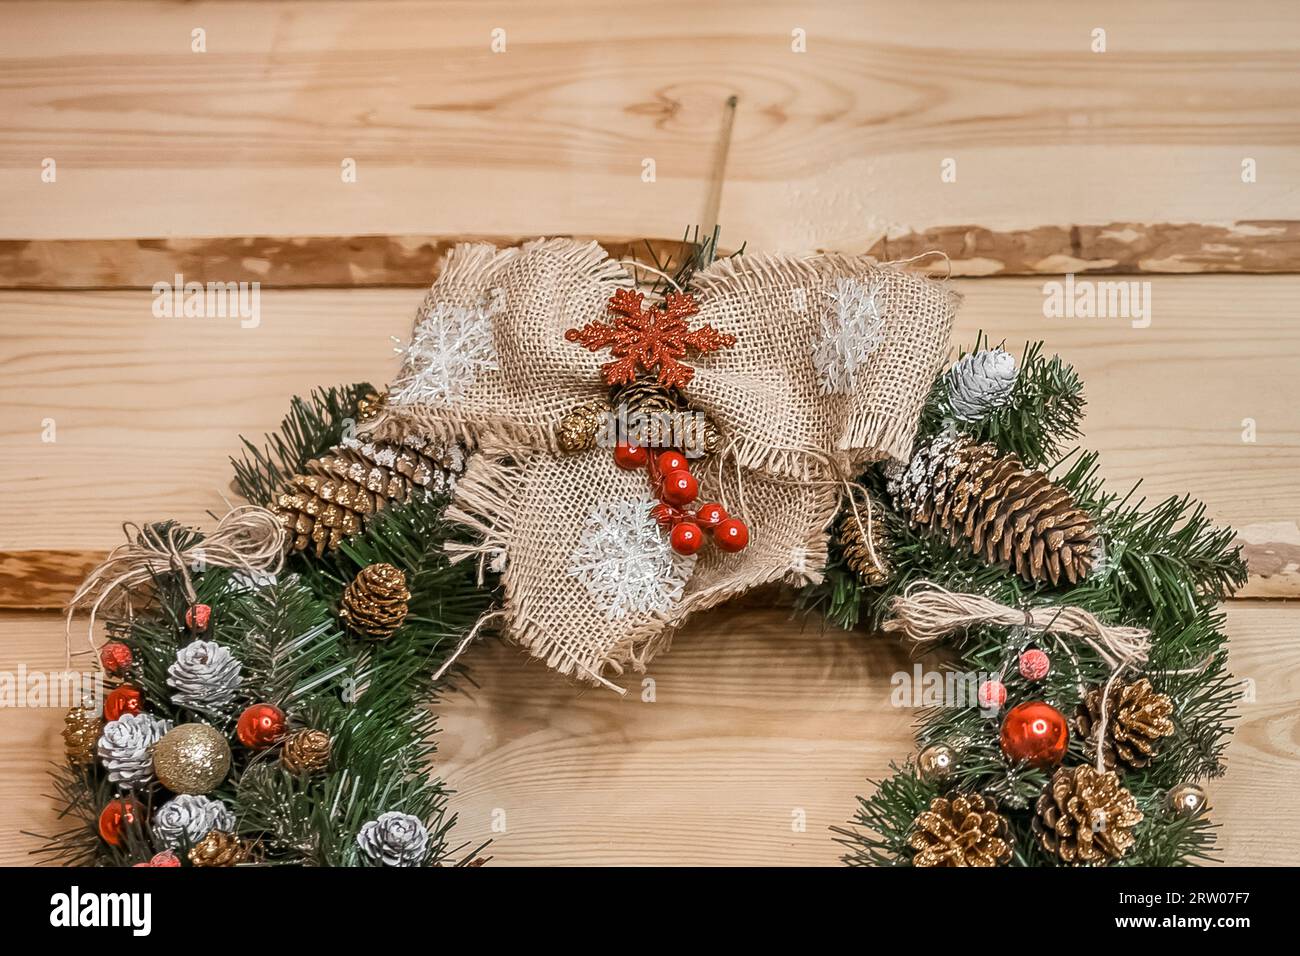 Christmas wreath made of artificial spruce, pine needles, decorated with cones and toys on a wooden background, close up. Stock Photo